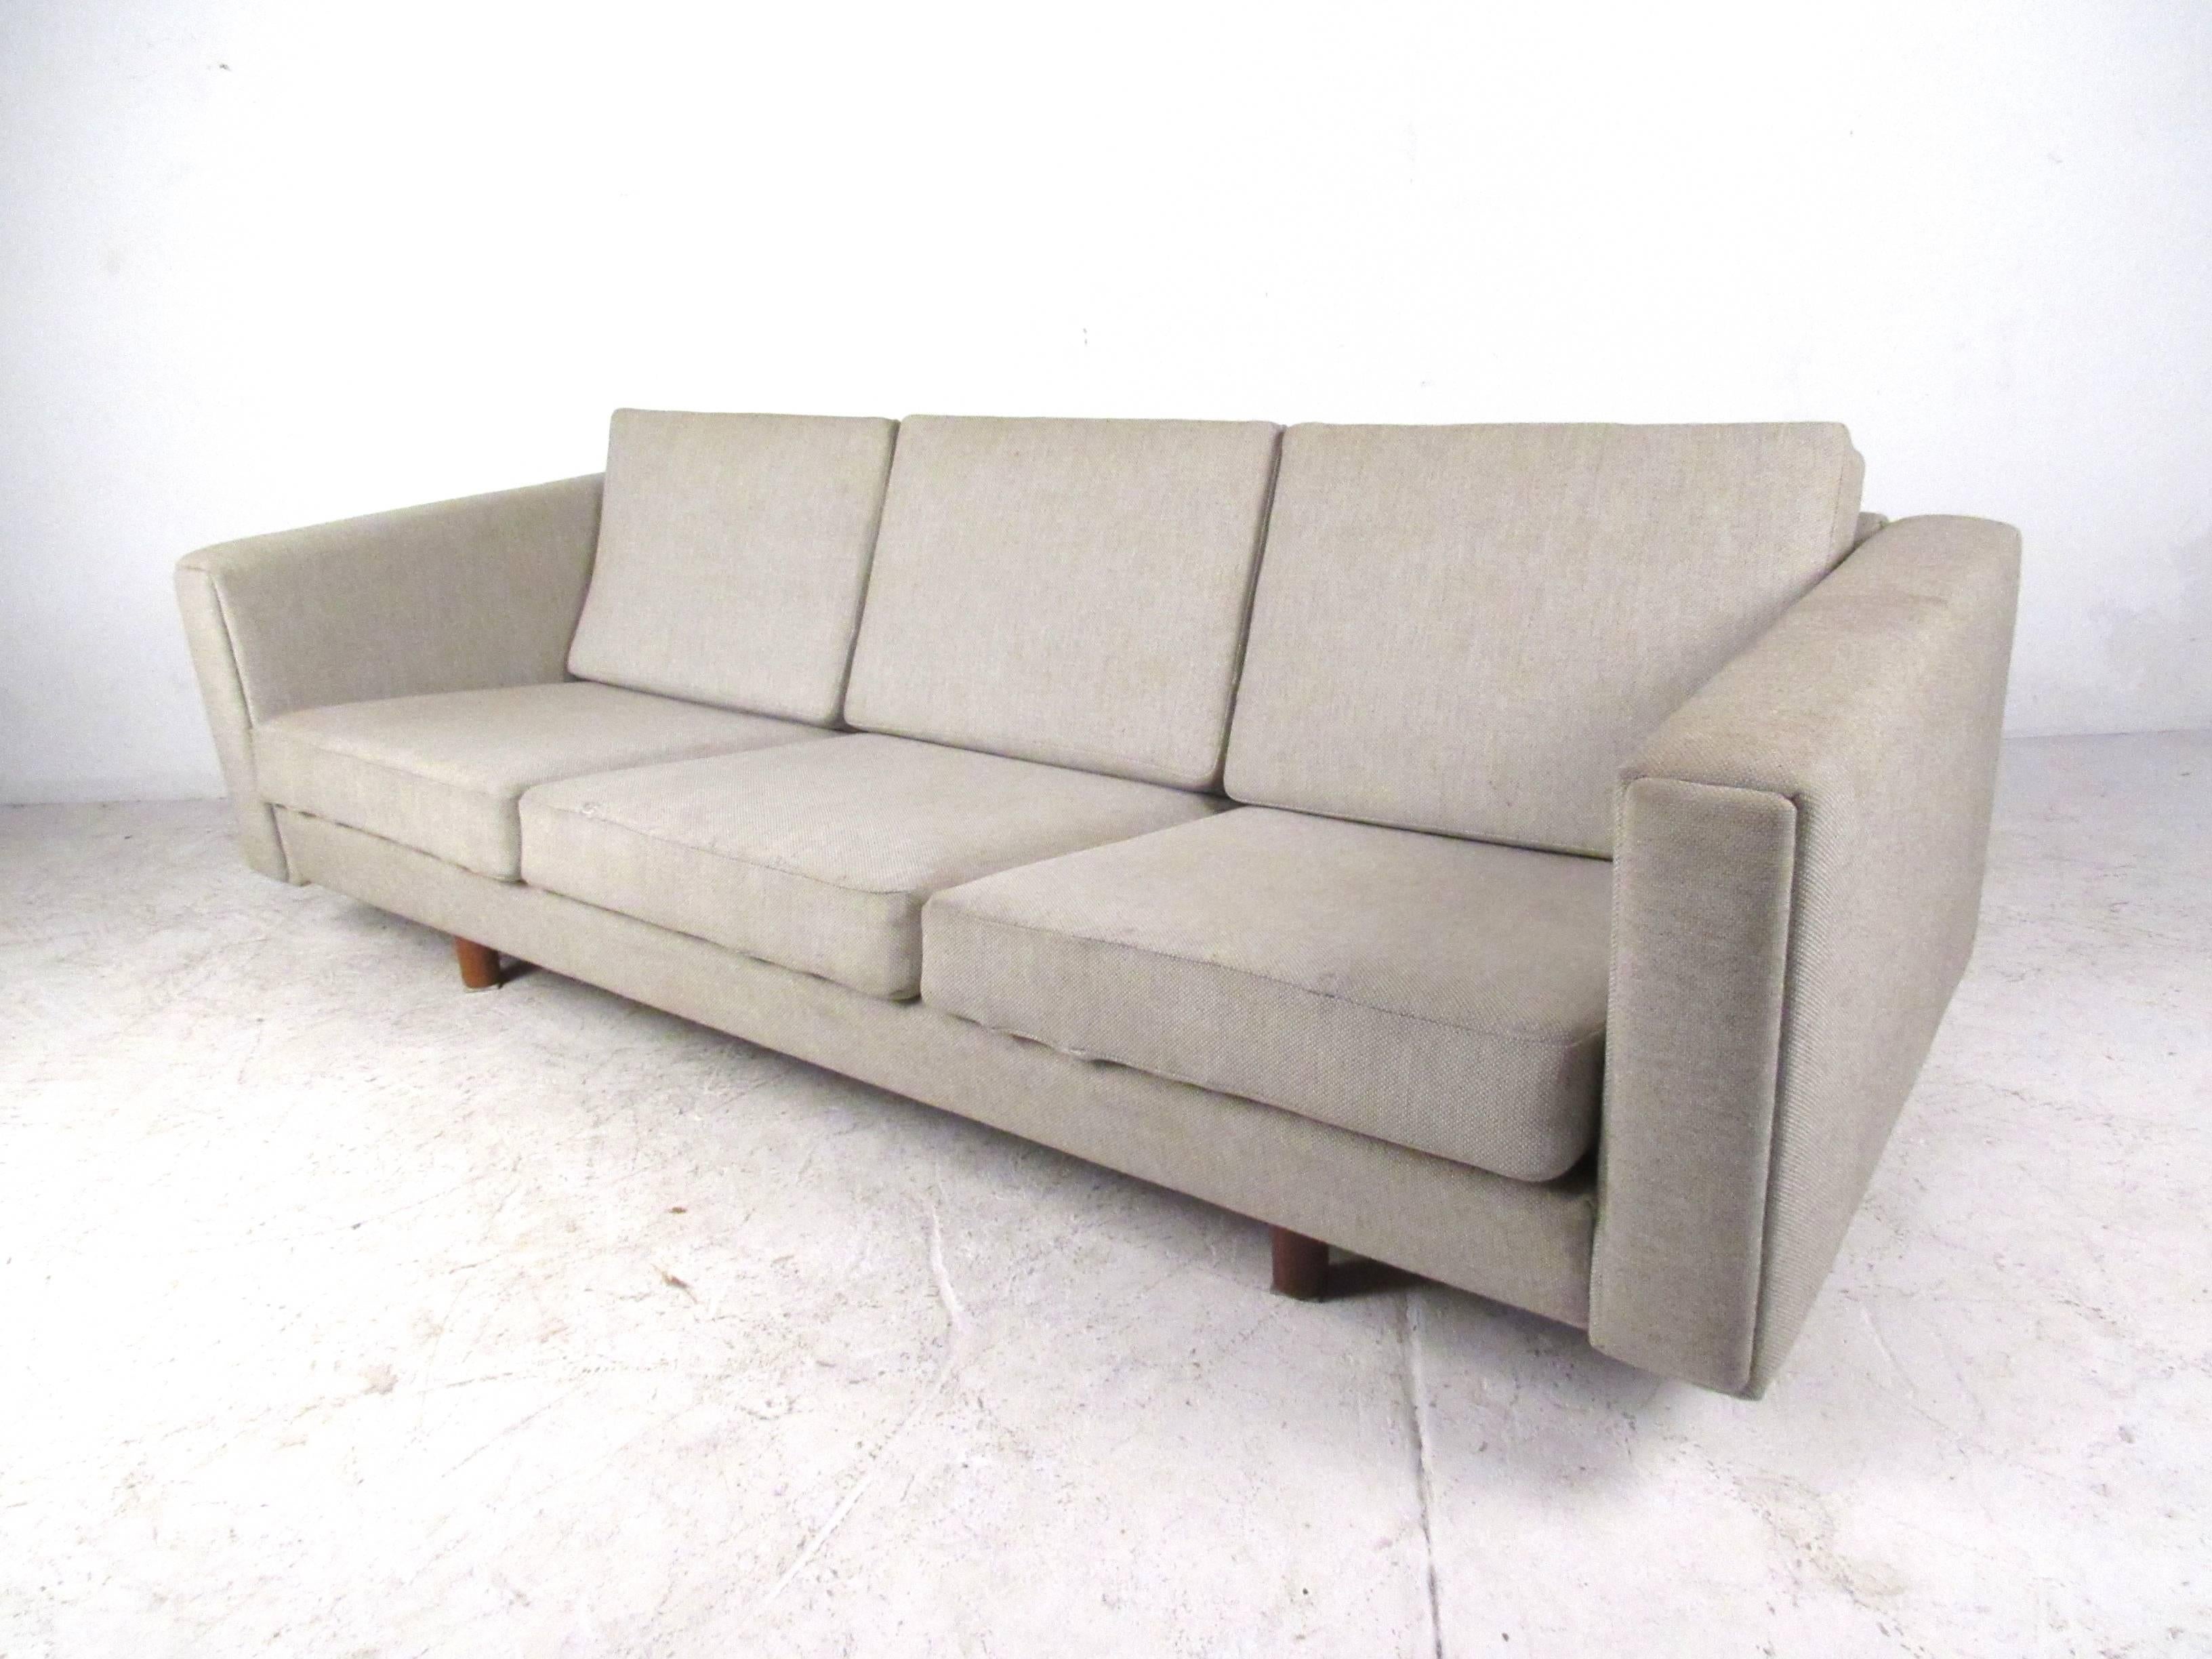 This beautiful matching pair includes three-seat sofa and two person loveseat, both featuring the unique lines and comfortable proportions of Hans Wegner's Mid-Century style. Please confirm item location (NY or NJ). Loveseat dimensions: 56.25 W 31.5